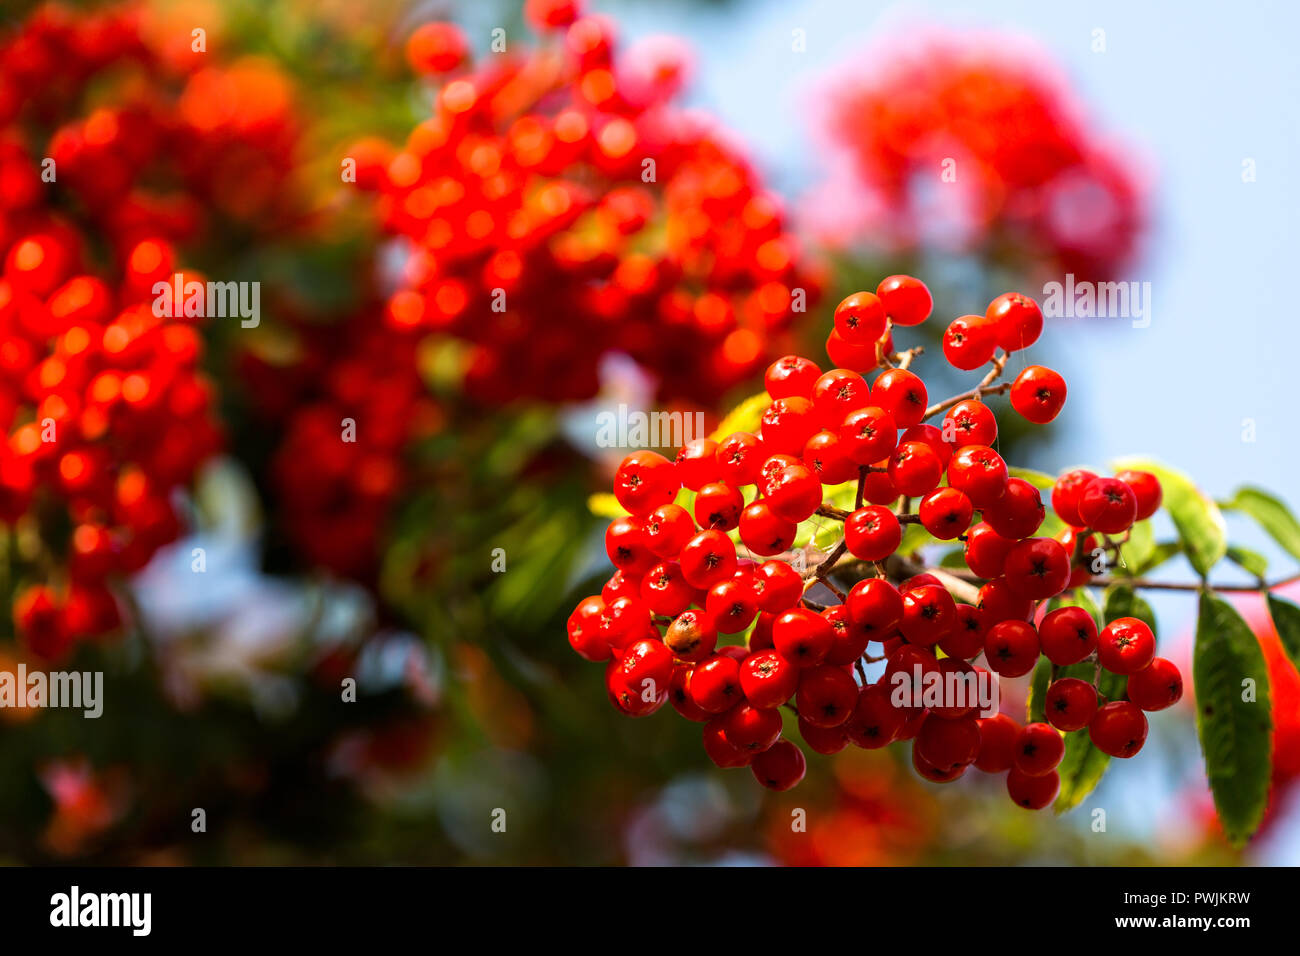 Cotoneaster Tree with Bright Red Berries in Autumn Stock Photo - Alamy